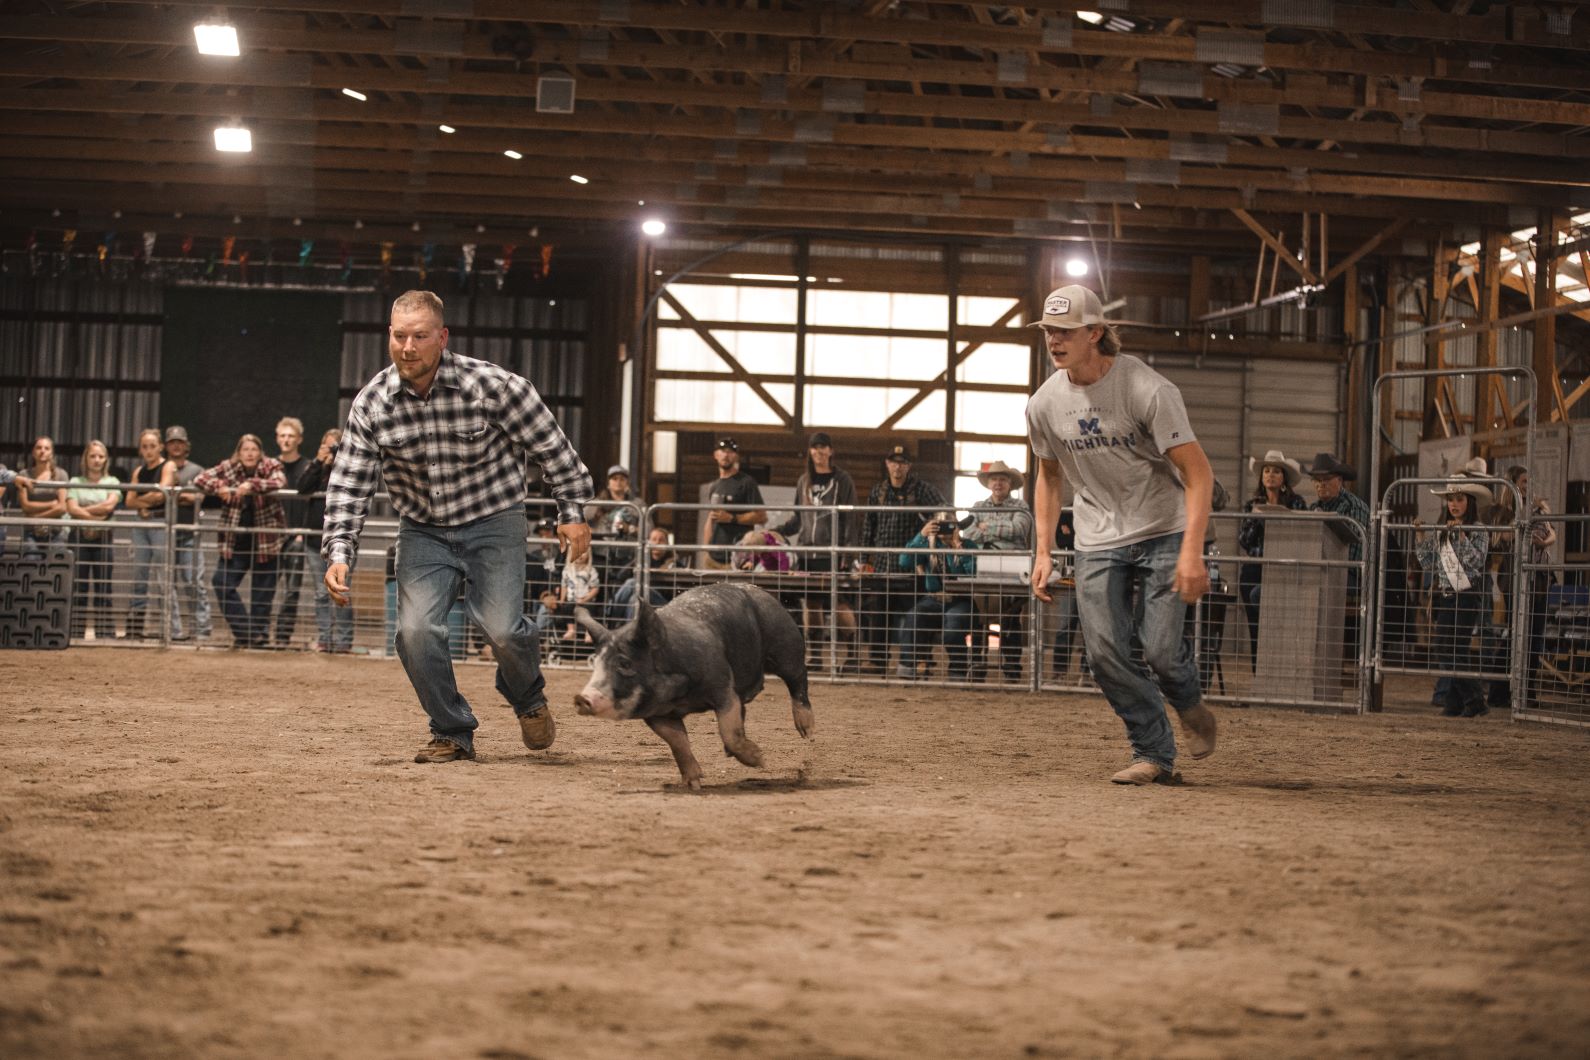 Men participating in the Pig penning contest